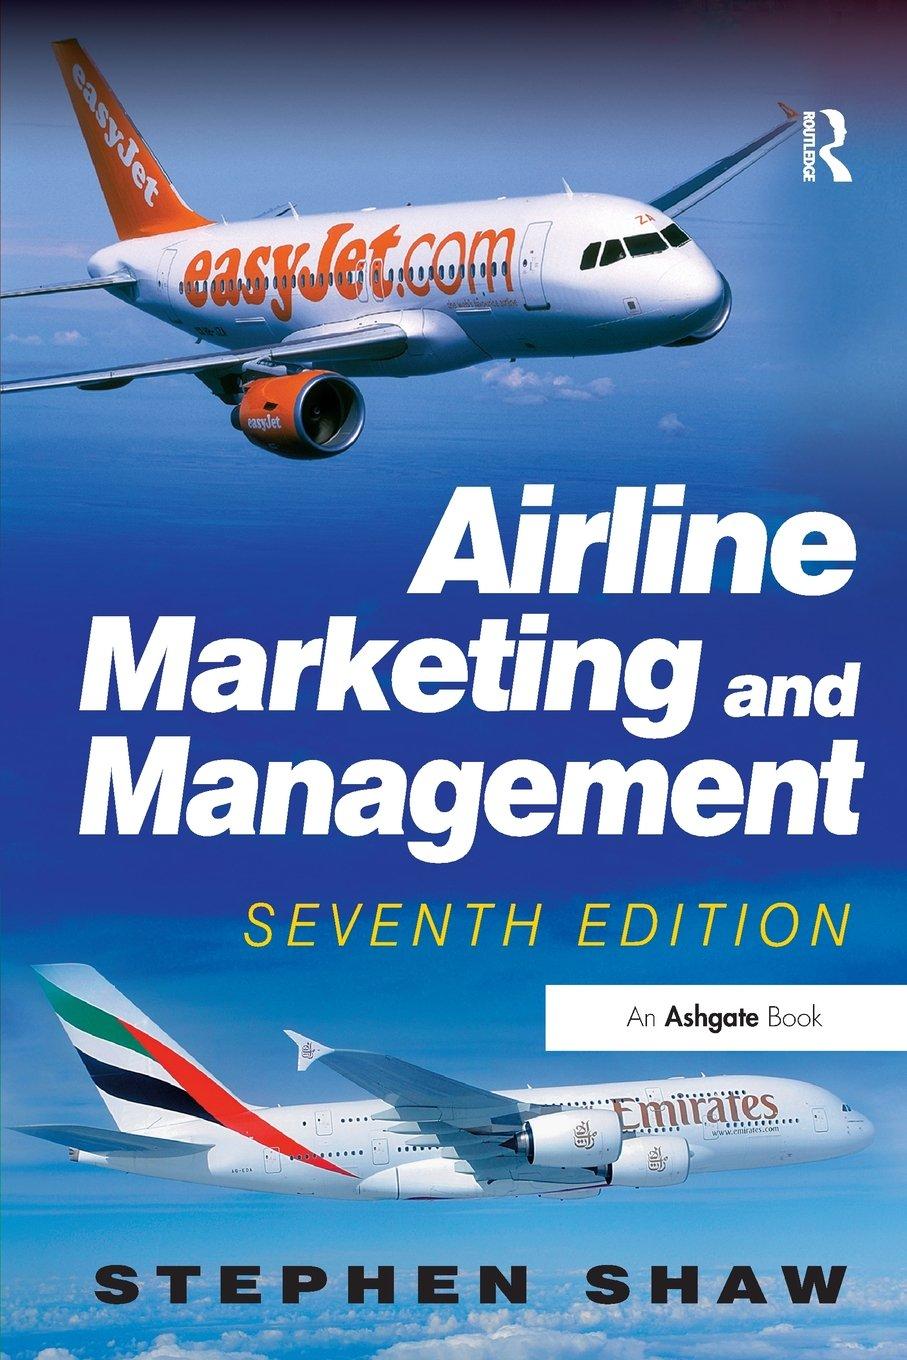 airline marketing and management 7th edition stephen shaw 1409401499, 978-1409401490